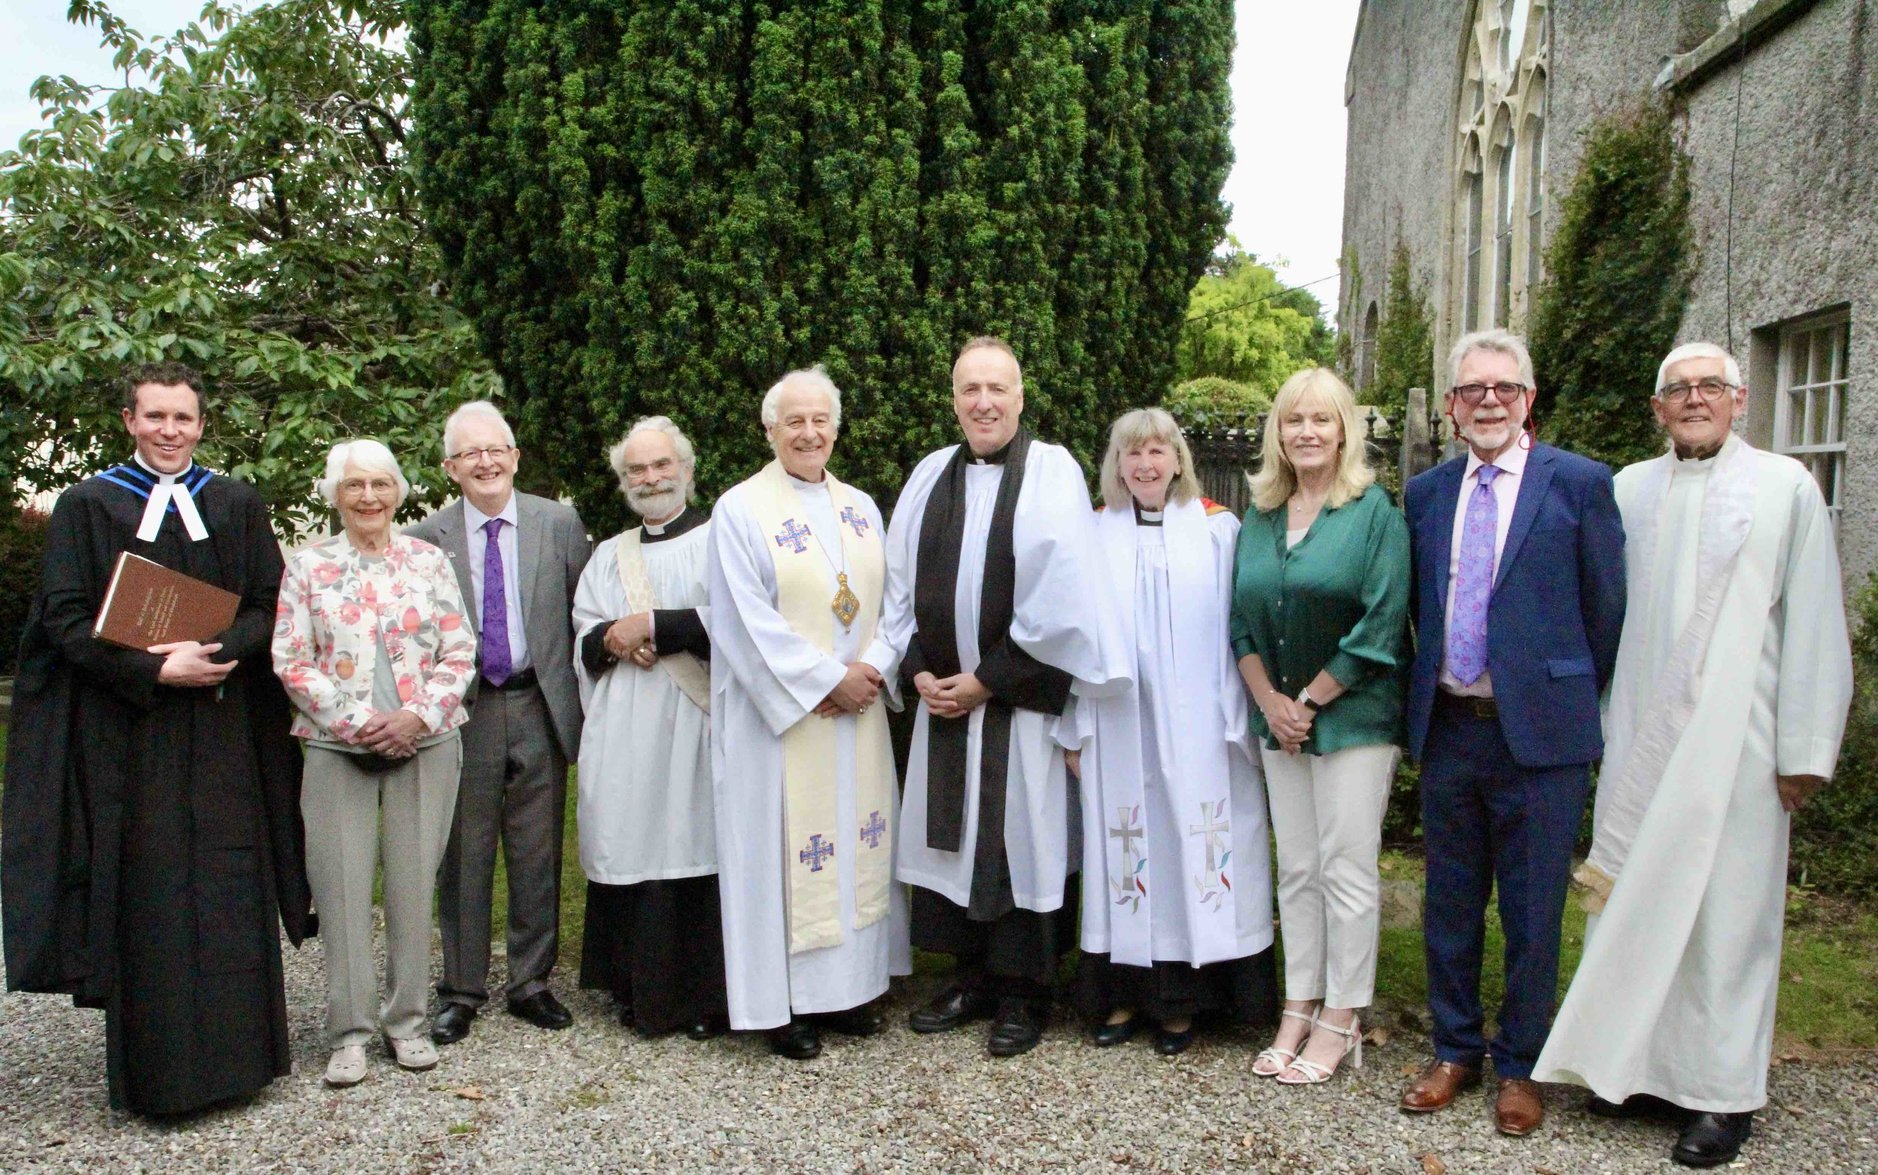 Welcome Back – Parishioners of Stillorgan and Blackrock Delight in New Rector